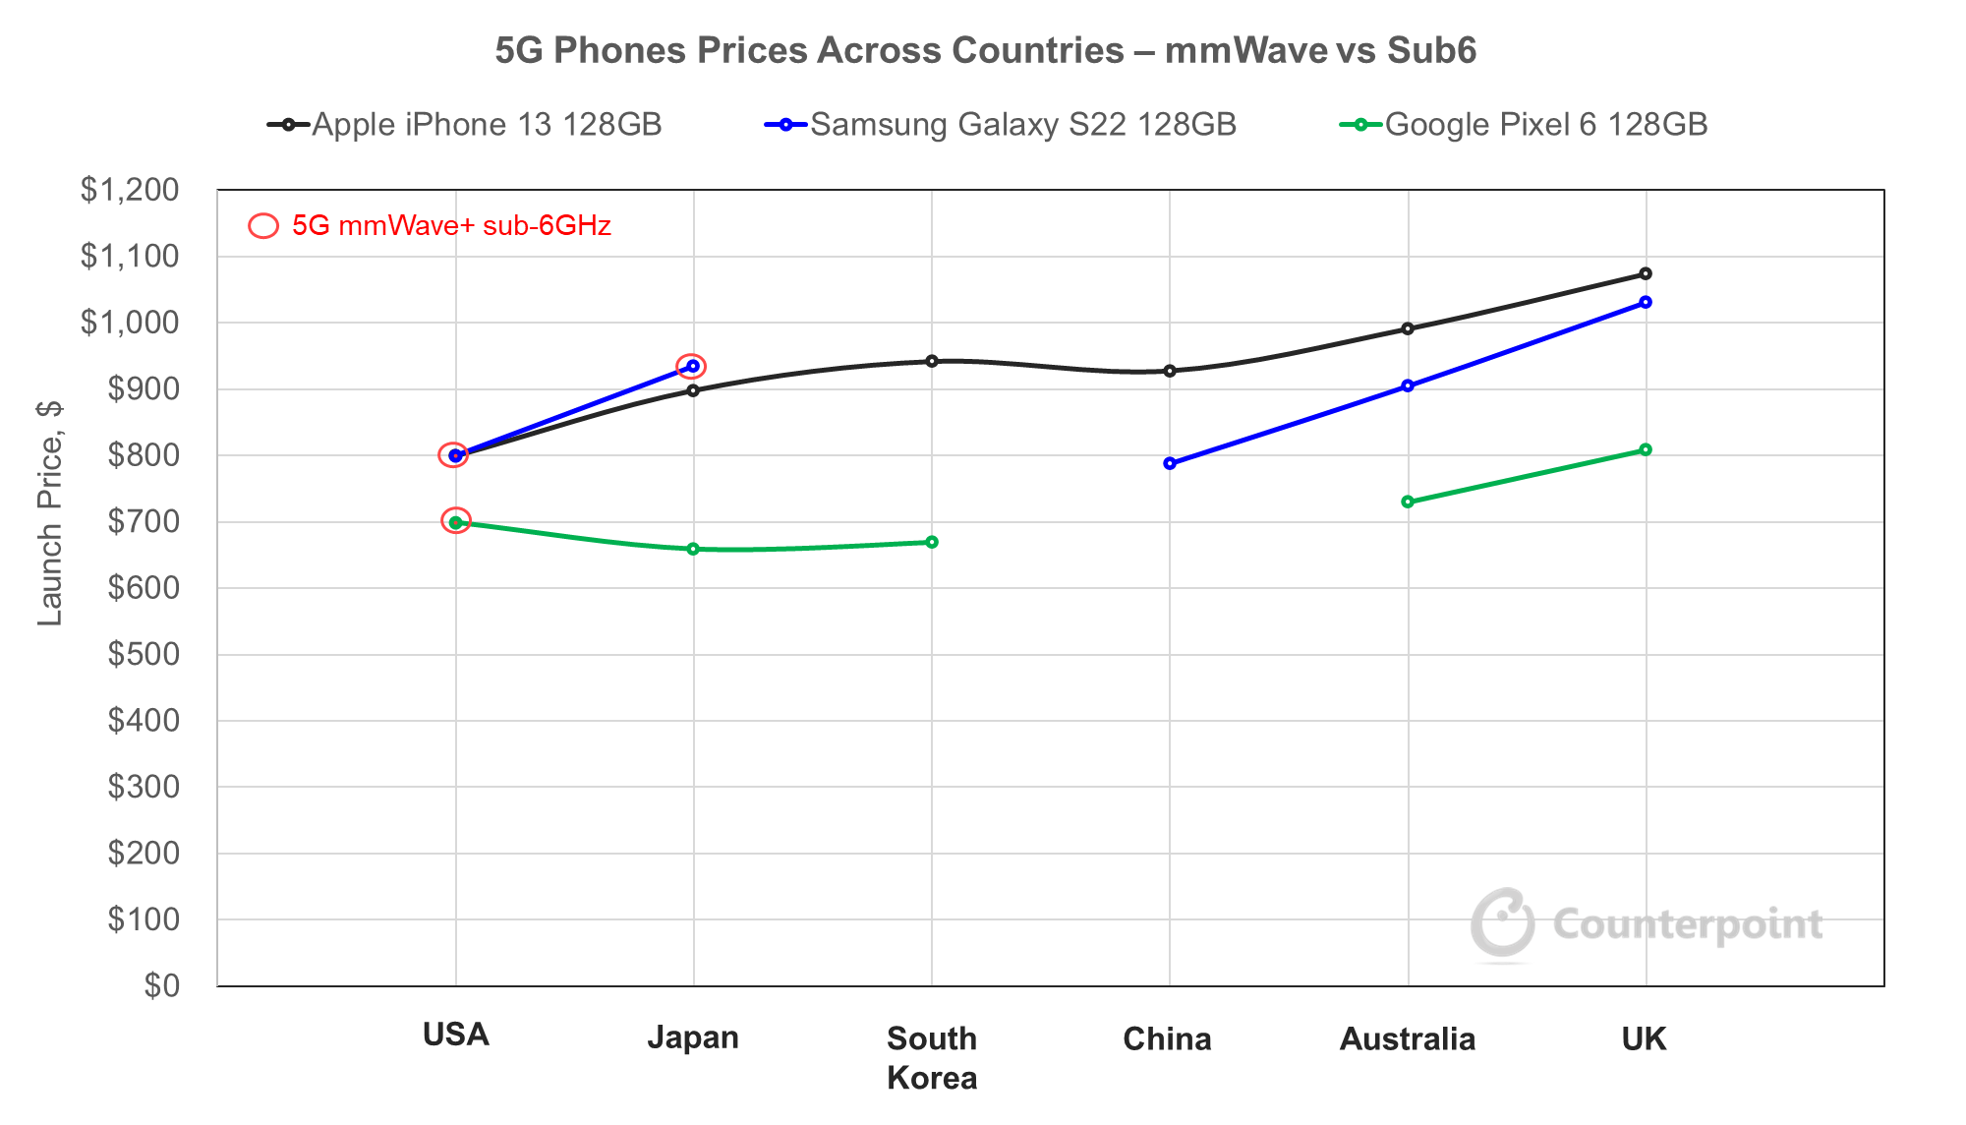 Counterpoint Research 5G Phones Prices Across Countries – mmWave vs Sub6